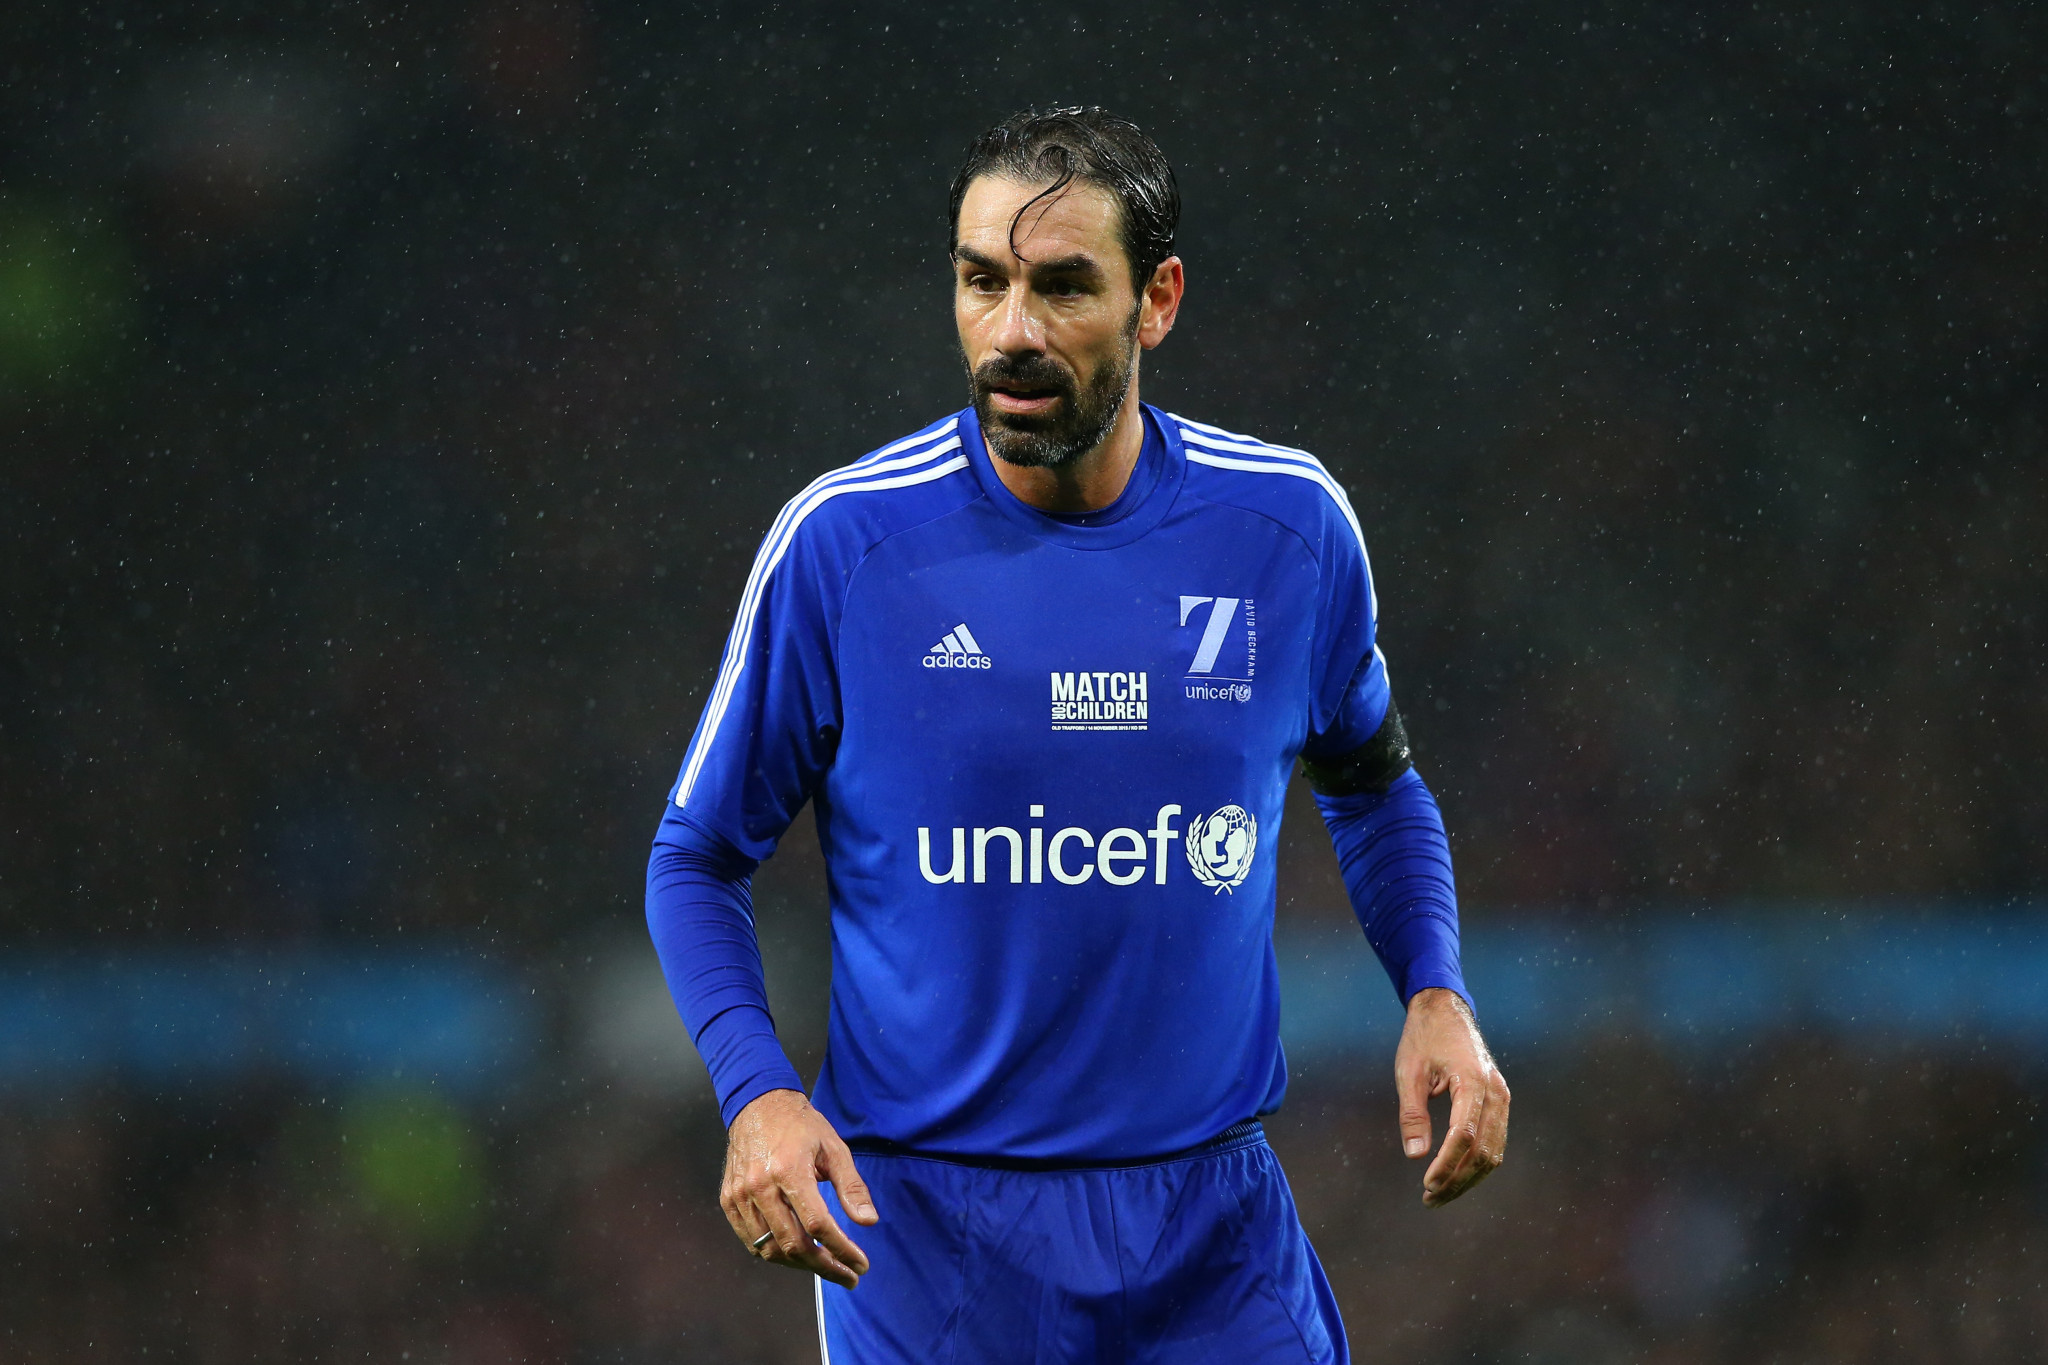 Pires to travel to Gliwice for Teqball World Championships